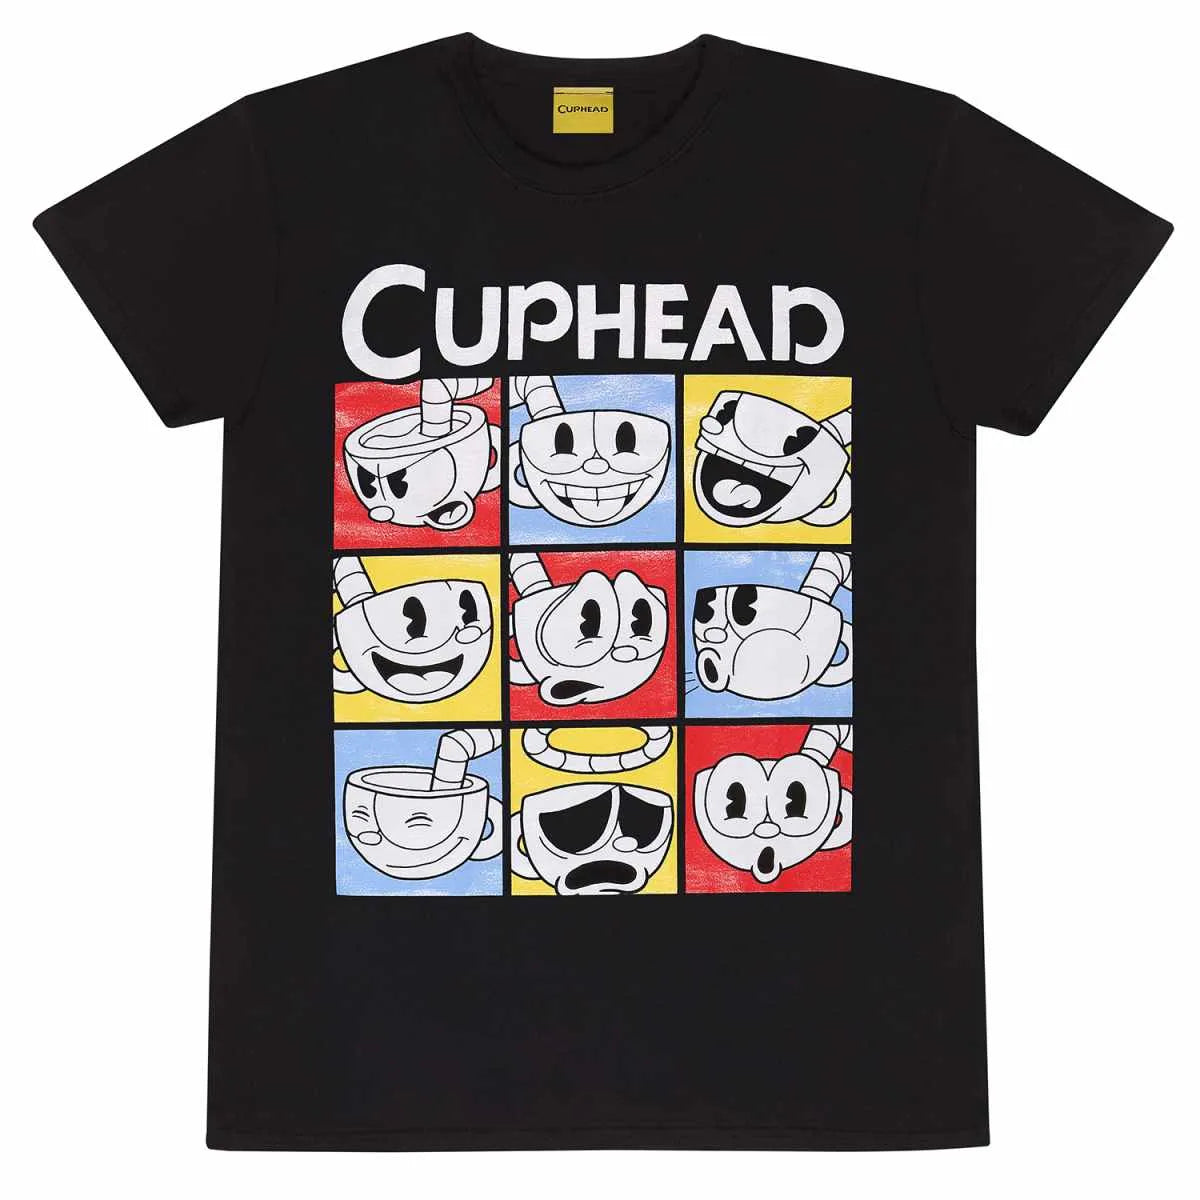 CUPHEAD – Expressions T-Shirt - Women's